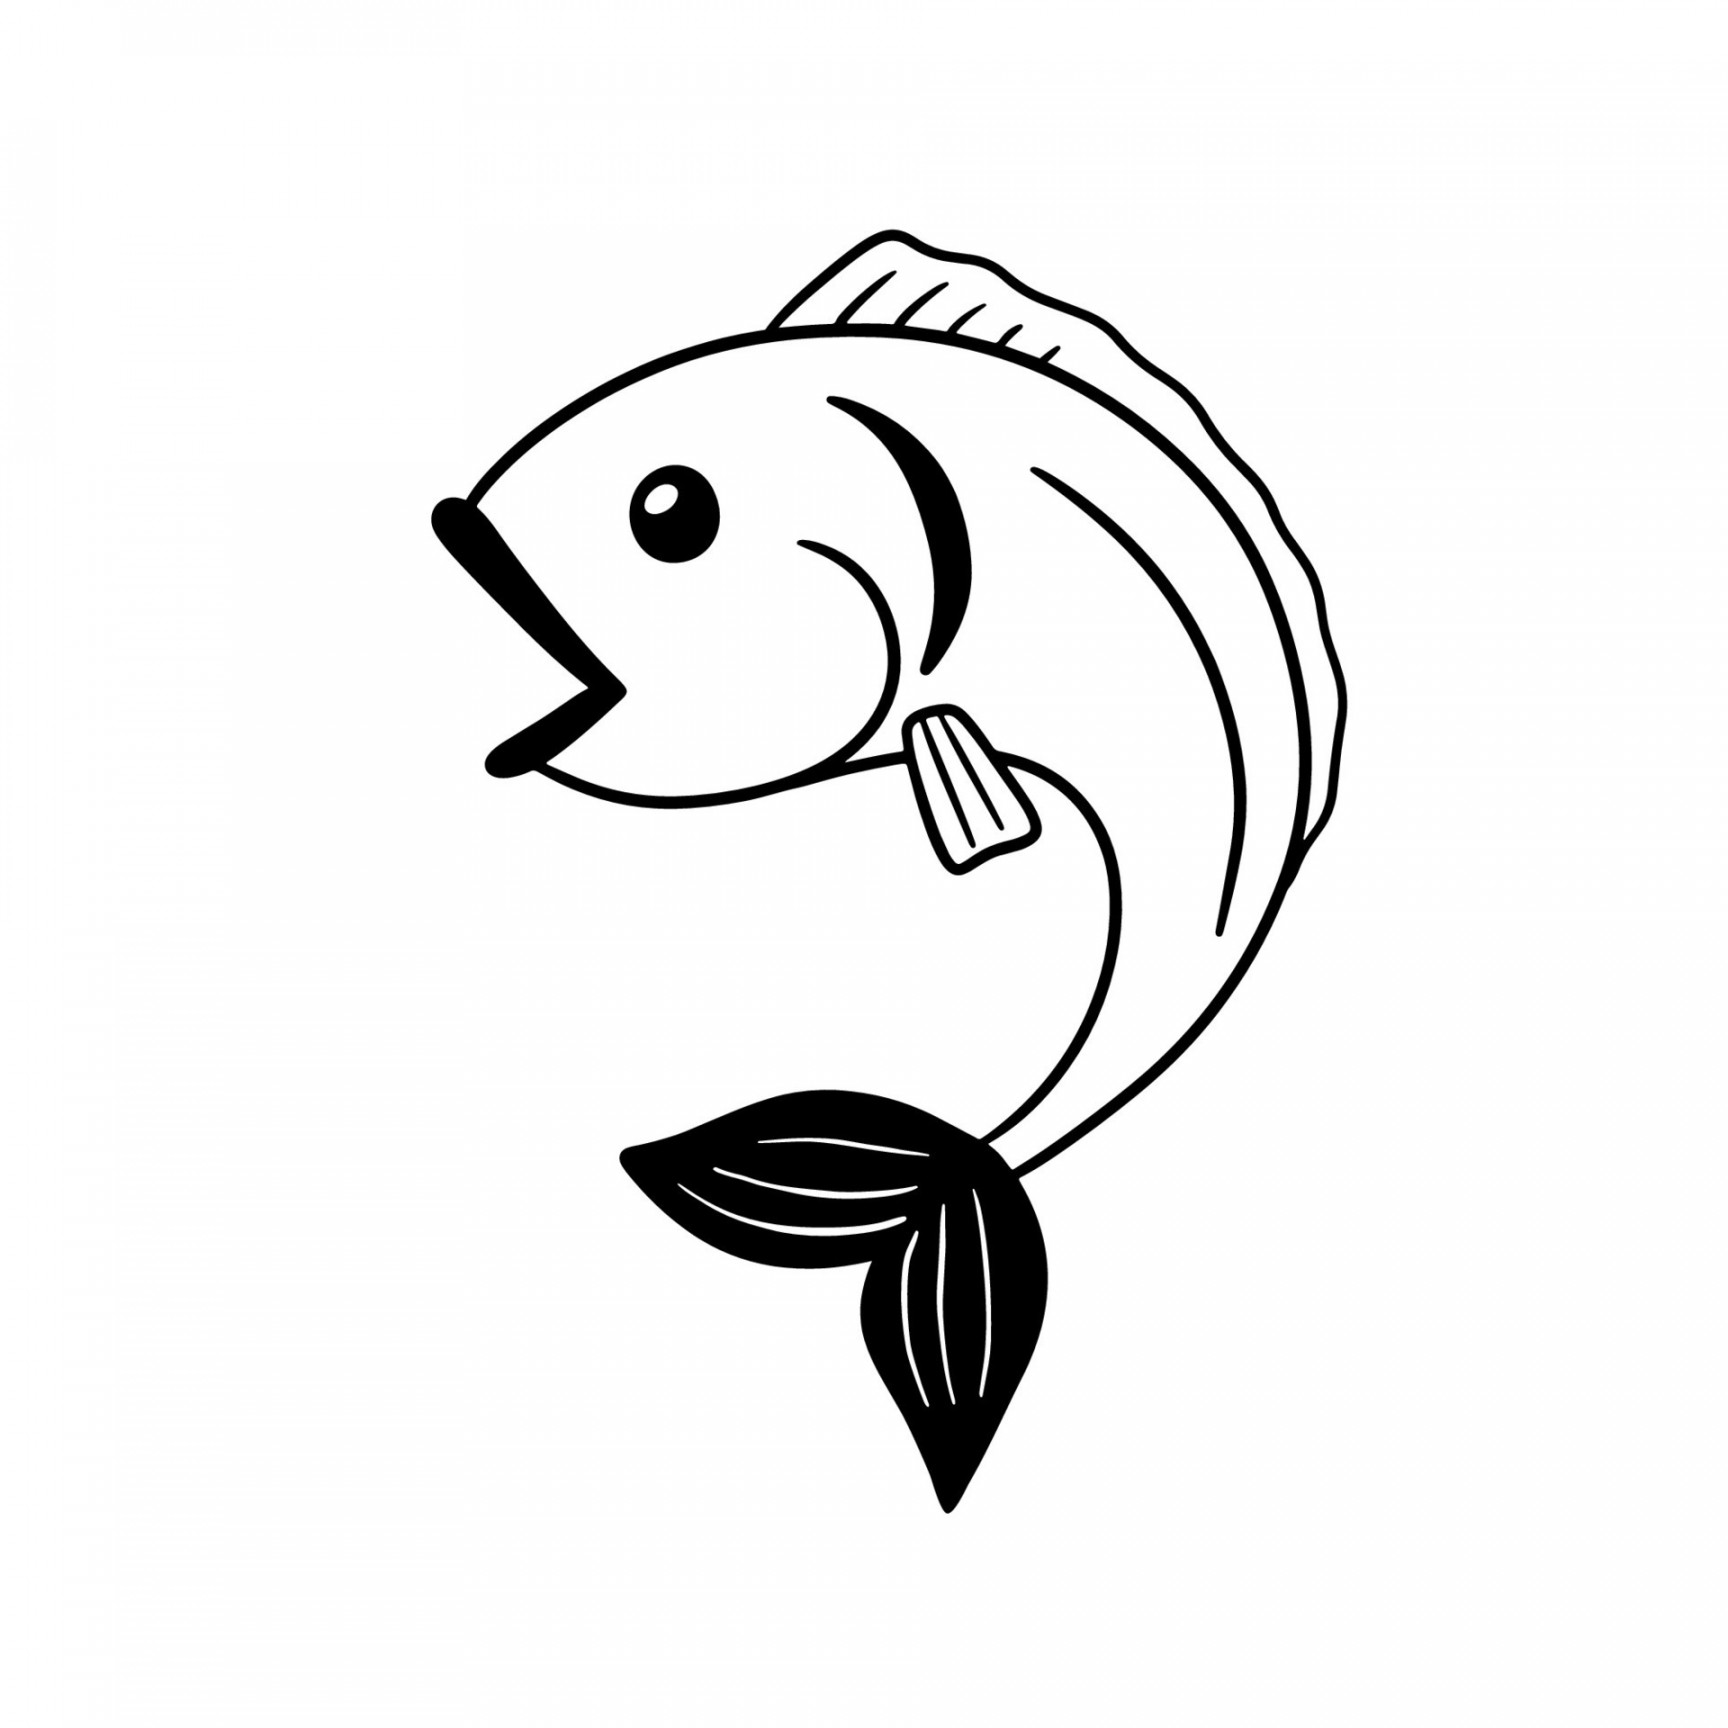 Black and white fish drawing